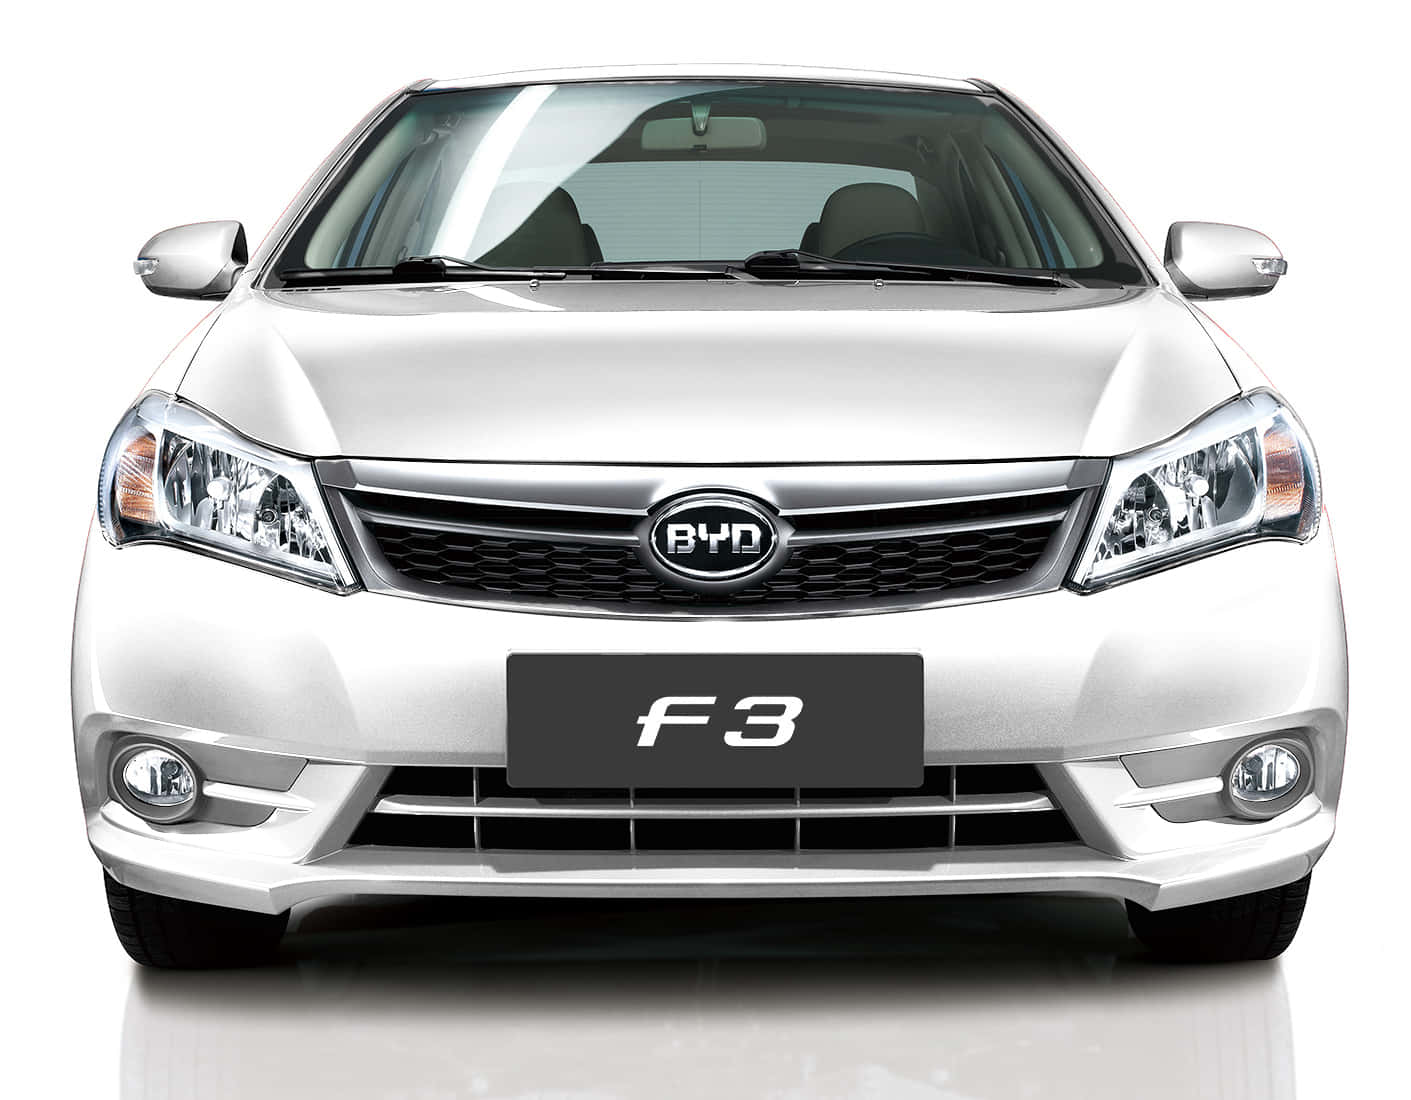 Stunning Byd F3 On An Open Road Wallpaper